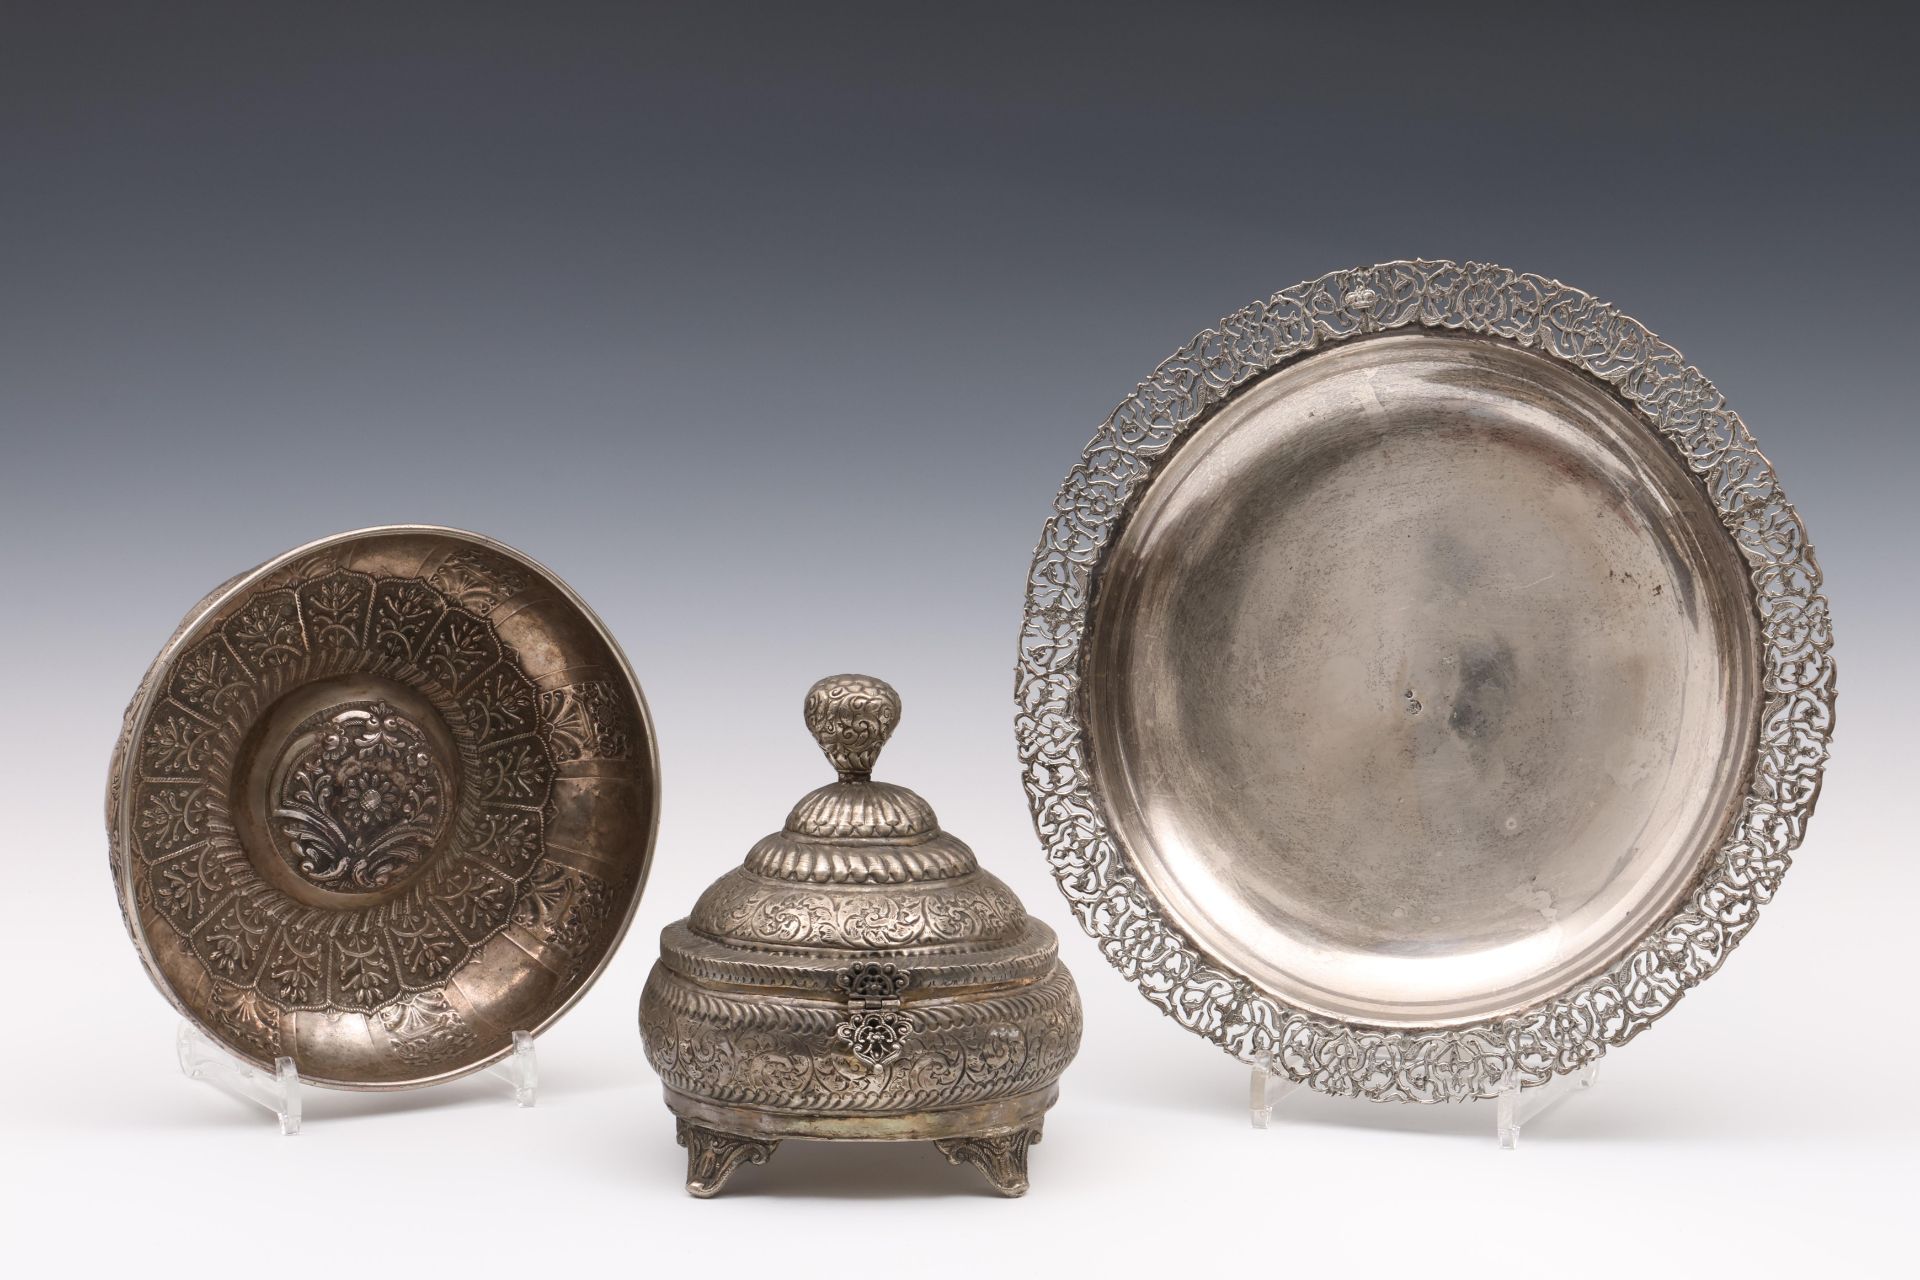 Ottoman, Turkey, silver alloy large dish, stamped with Tughra of Sultan, 19th century;